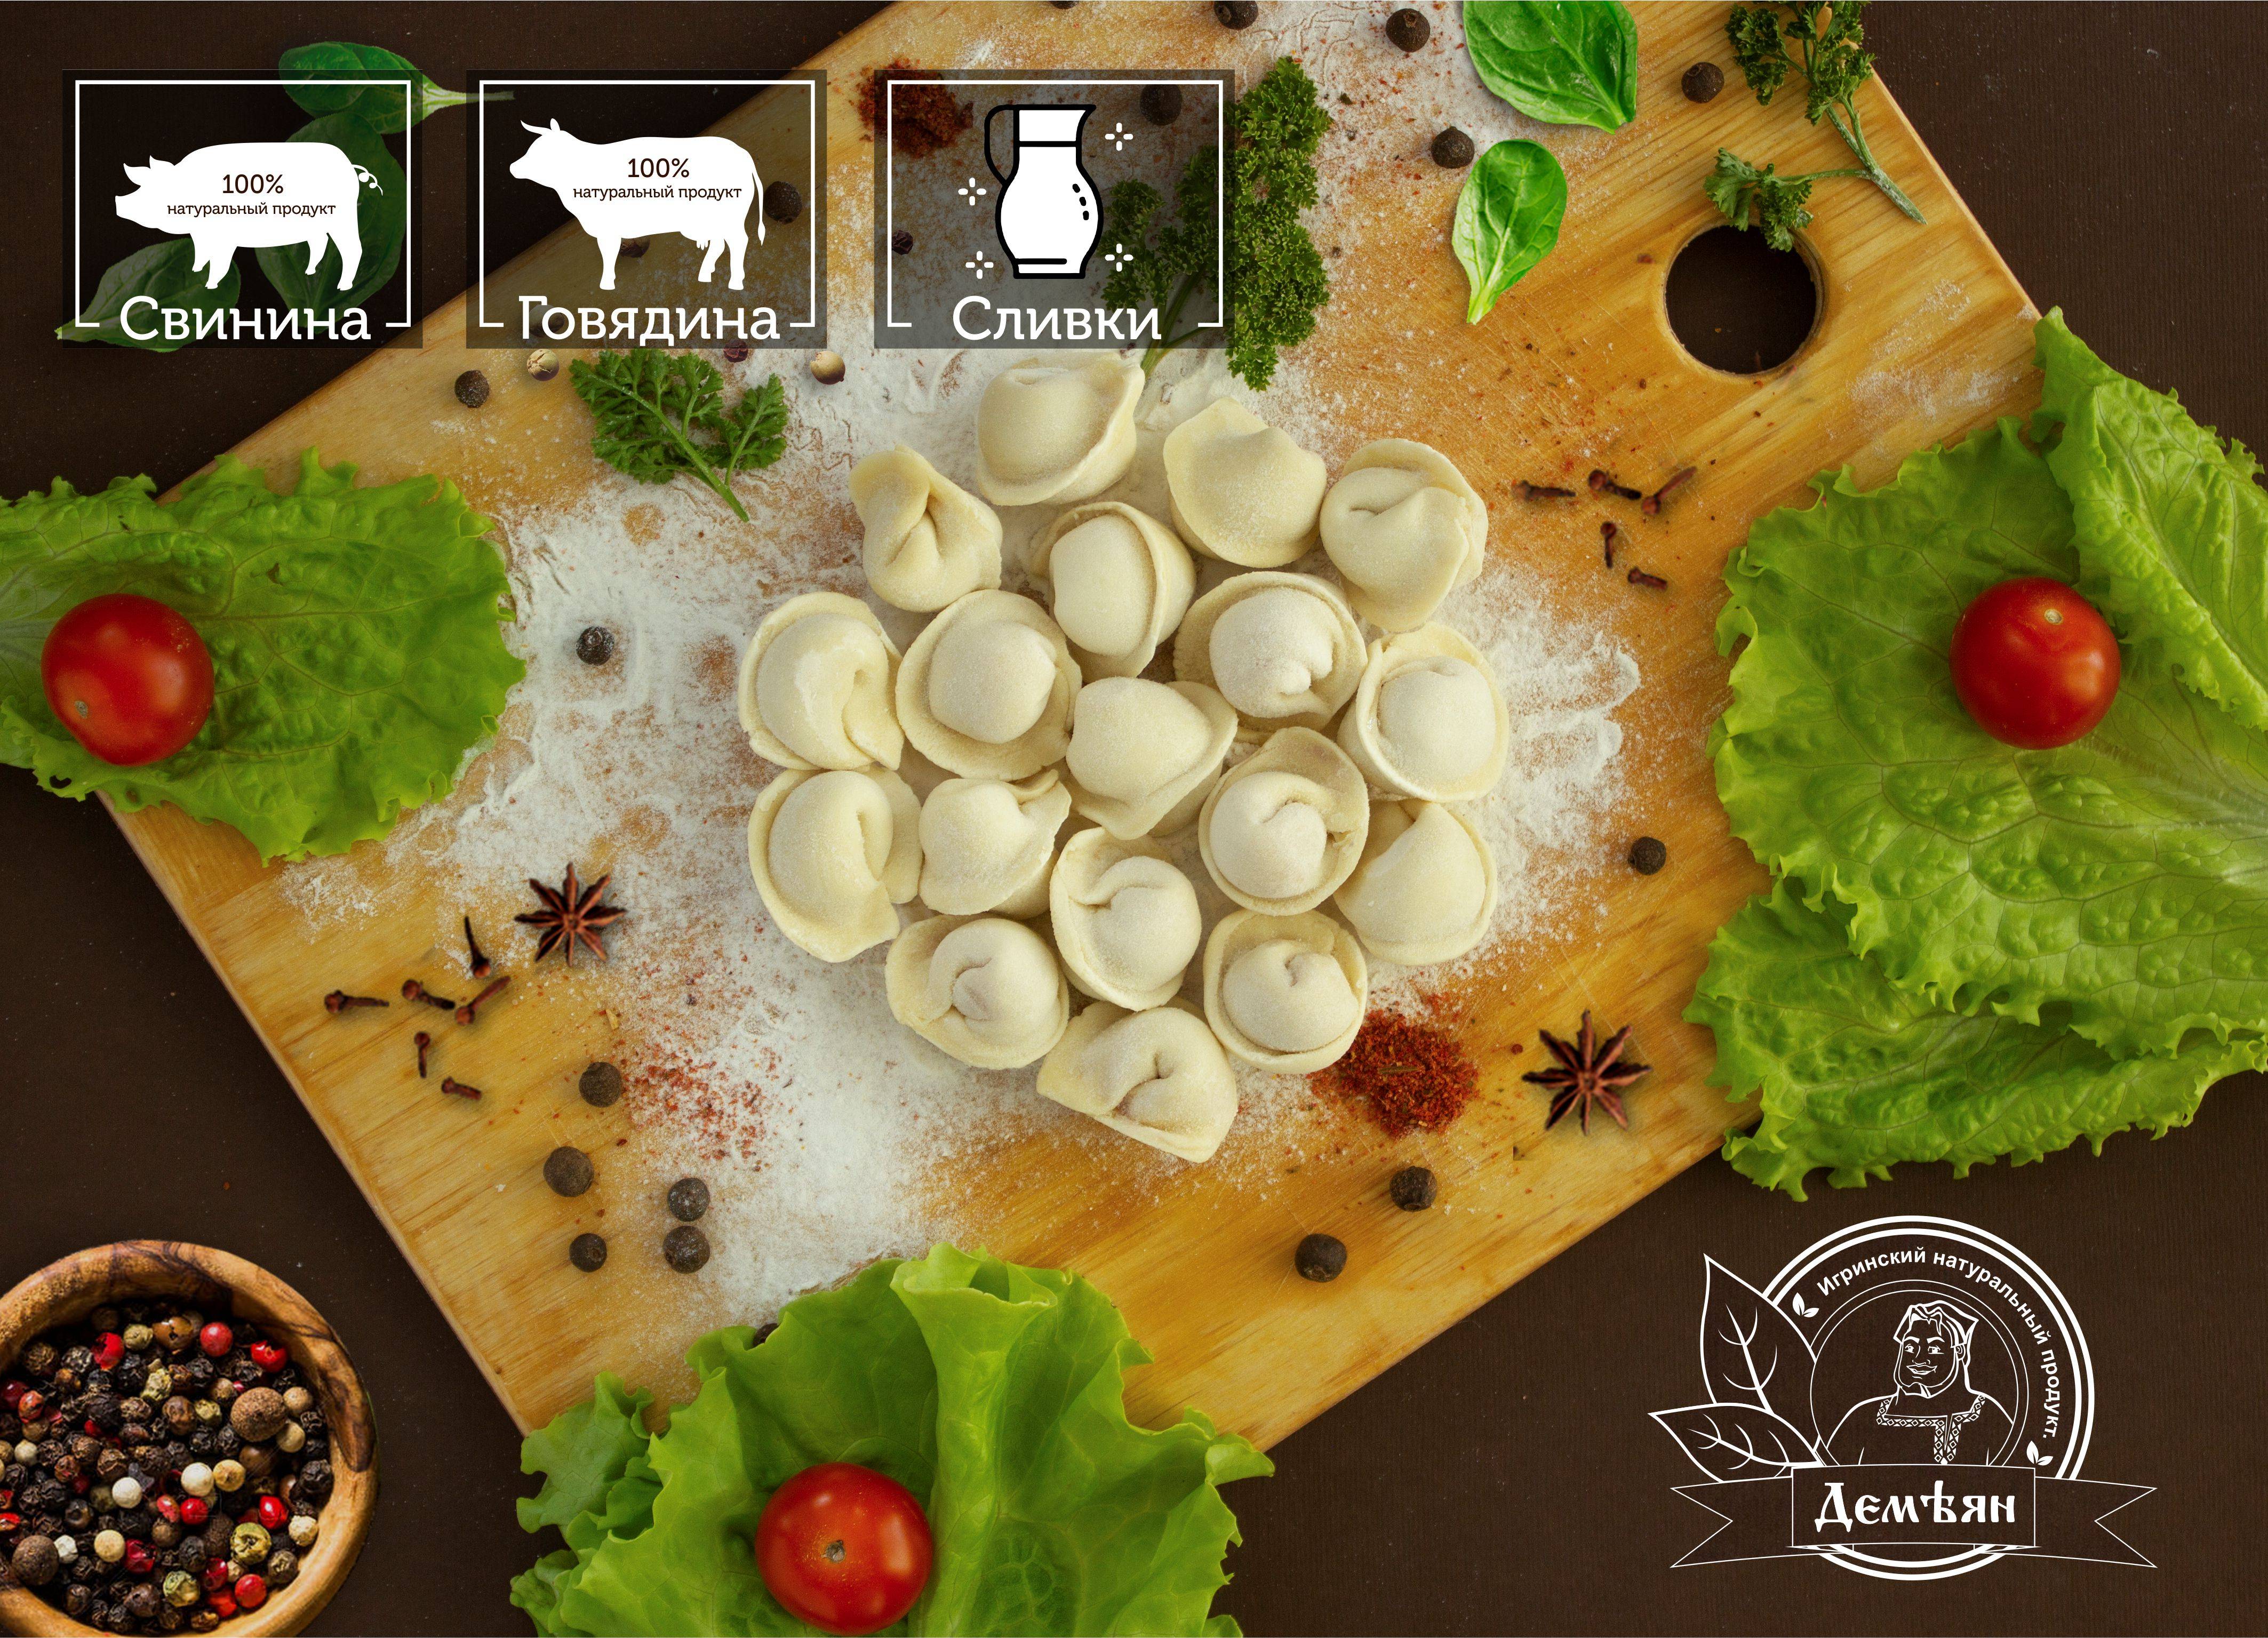 Dumplings "Homemade with cream" 0.8 kg - ИП Поздеева Наталья Викторовна - Agriculture & Food buy wholesale from manufacturer and supplier on UDM.MARKET